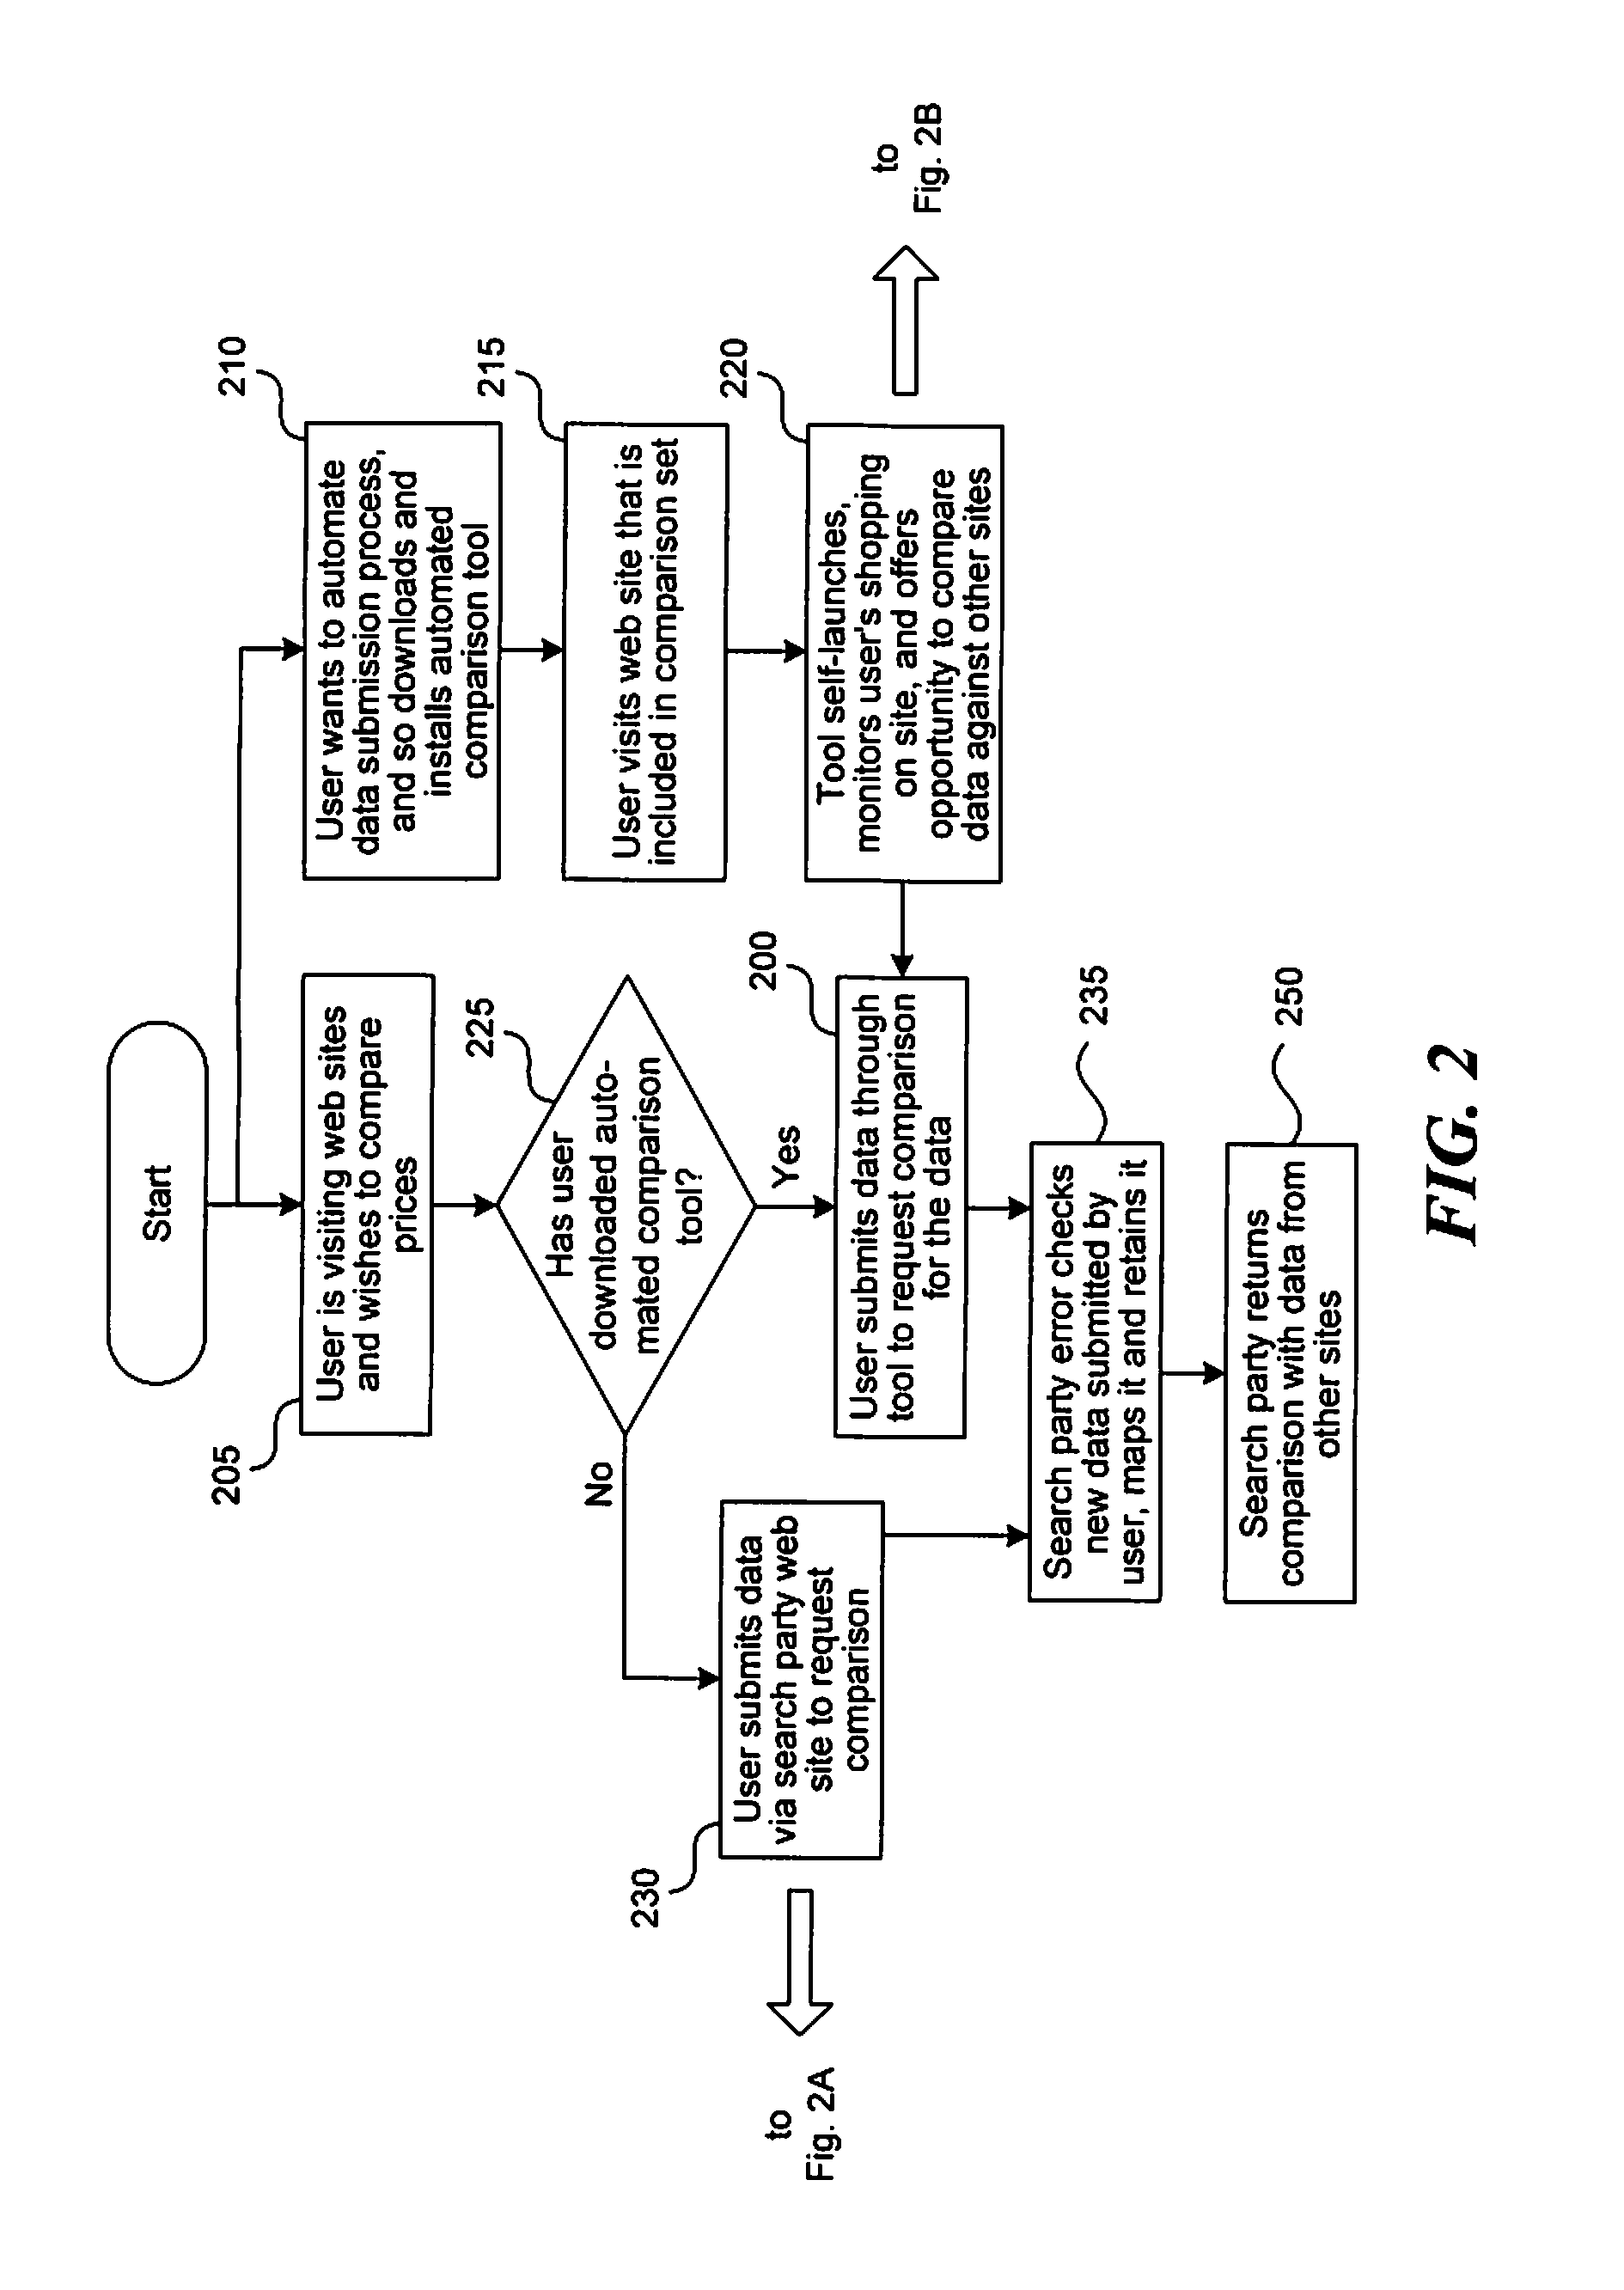 Method and system for aggregating, standardizing and presenting purchase information from shoppers and sellers to facilitate comparison shopping and purchases